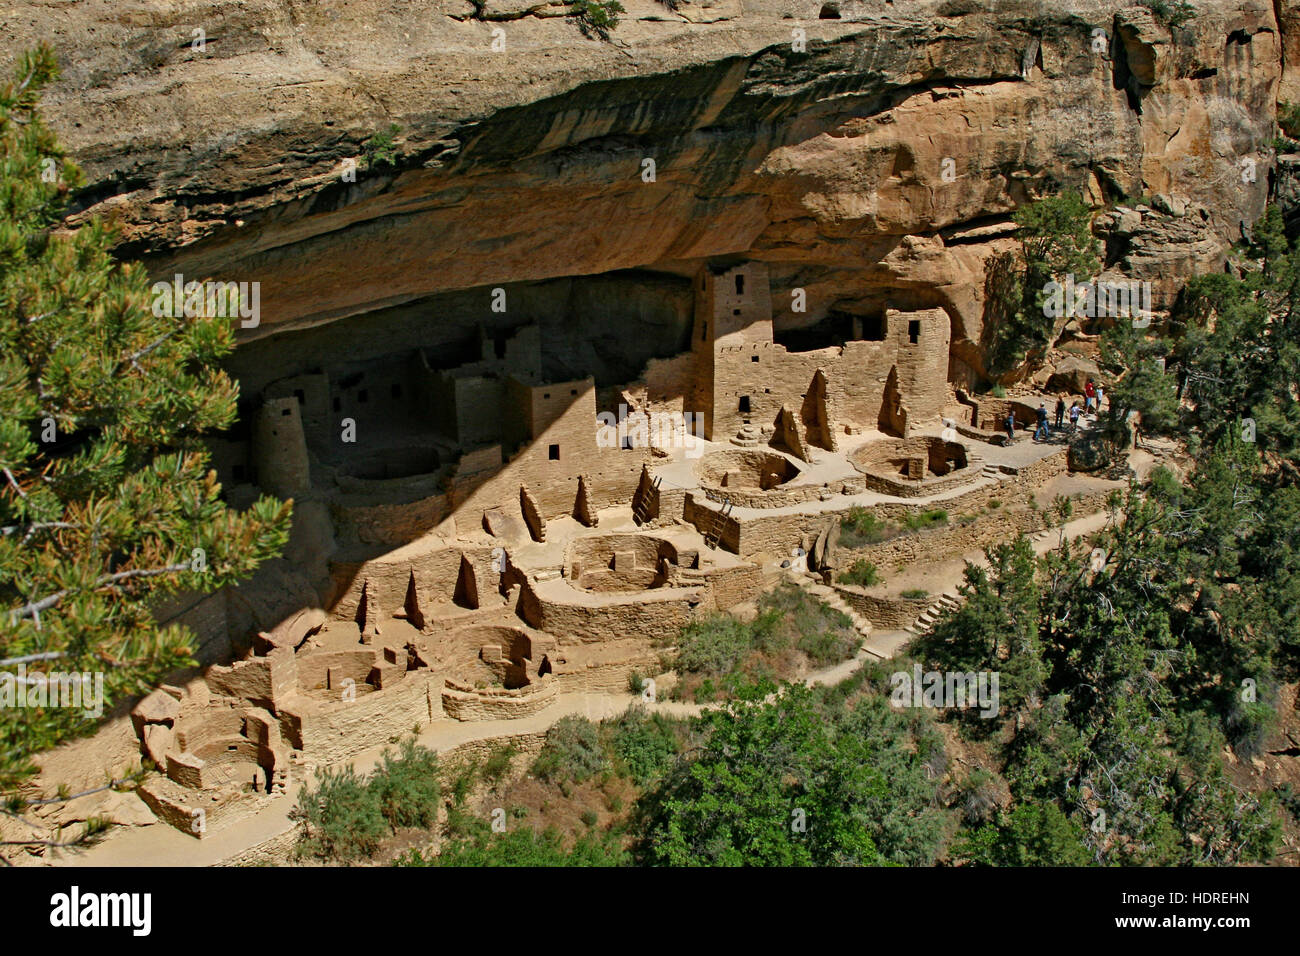 Spruce Tree House pueblo at Mesa Verde in Colorado constructed by the ancestors of the Pueblo peoples of the Southwest. Stock Photo